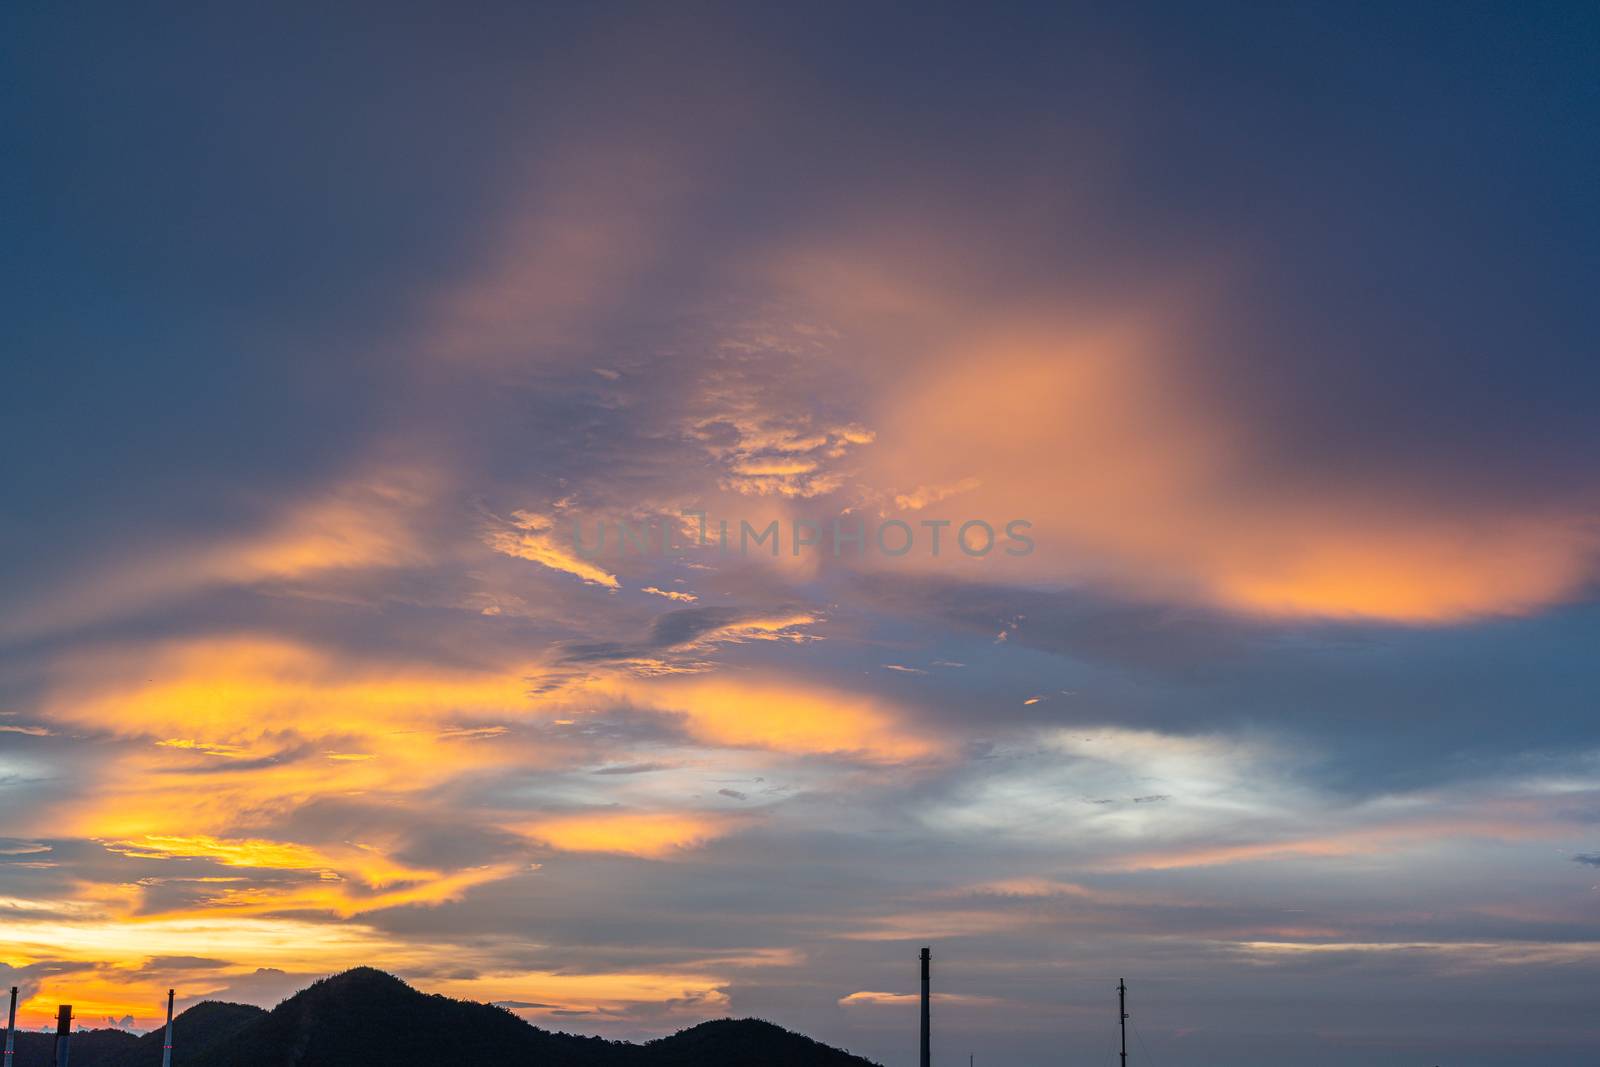 Bright orange and gold colors of the sunset sky. Summer sky with clouds during the sunset, landscape with a sky view over the hill by peerapixs